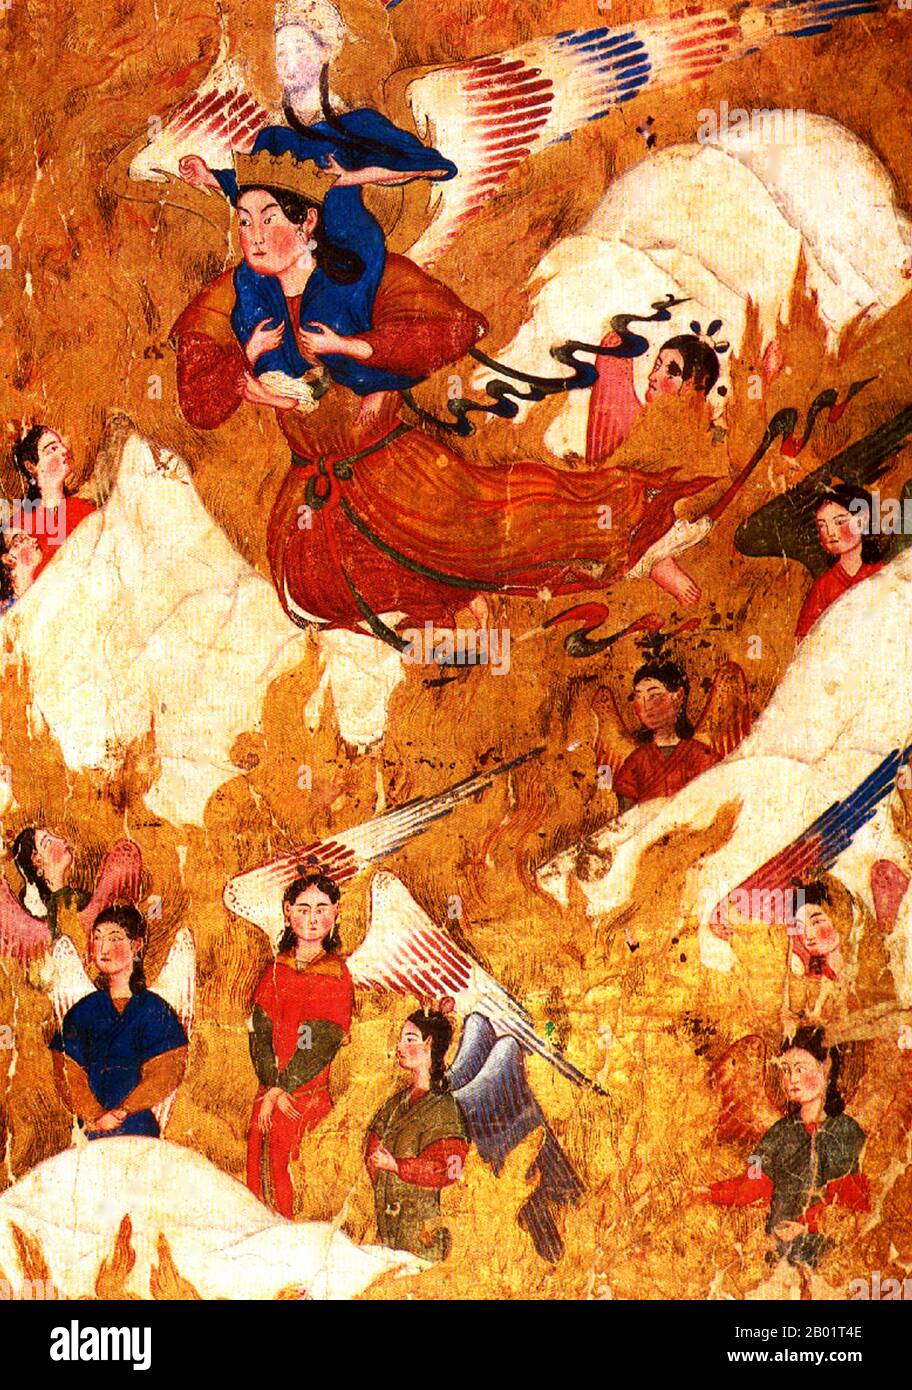 Iran/Persia: The angel Jibril (Gabriel) carries the Prophet Muhammad on his miraj or night journey. Miniature painting from the Miraj Nama or 'Ascension of Muhammad' by Ahmad Musa, c. 1330-1350.  The Isra and Mi'raj are the two parts of a Night Journey that, according to Islamic tradition, the Prophet Muhammad took during a single night around the year 621. It considered as both a physical and spiritual journey.  A brief outline of the story is related in surah 17 'Al-Isra' of the Qur'an, and other details come from the Hadith, supplemental accounts of the life of the Prophet Muhammad. Stock Photo